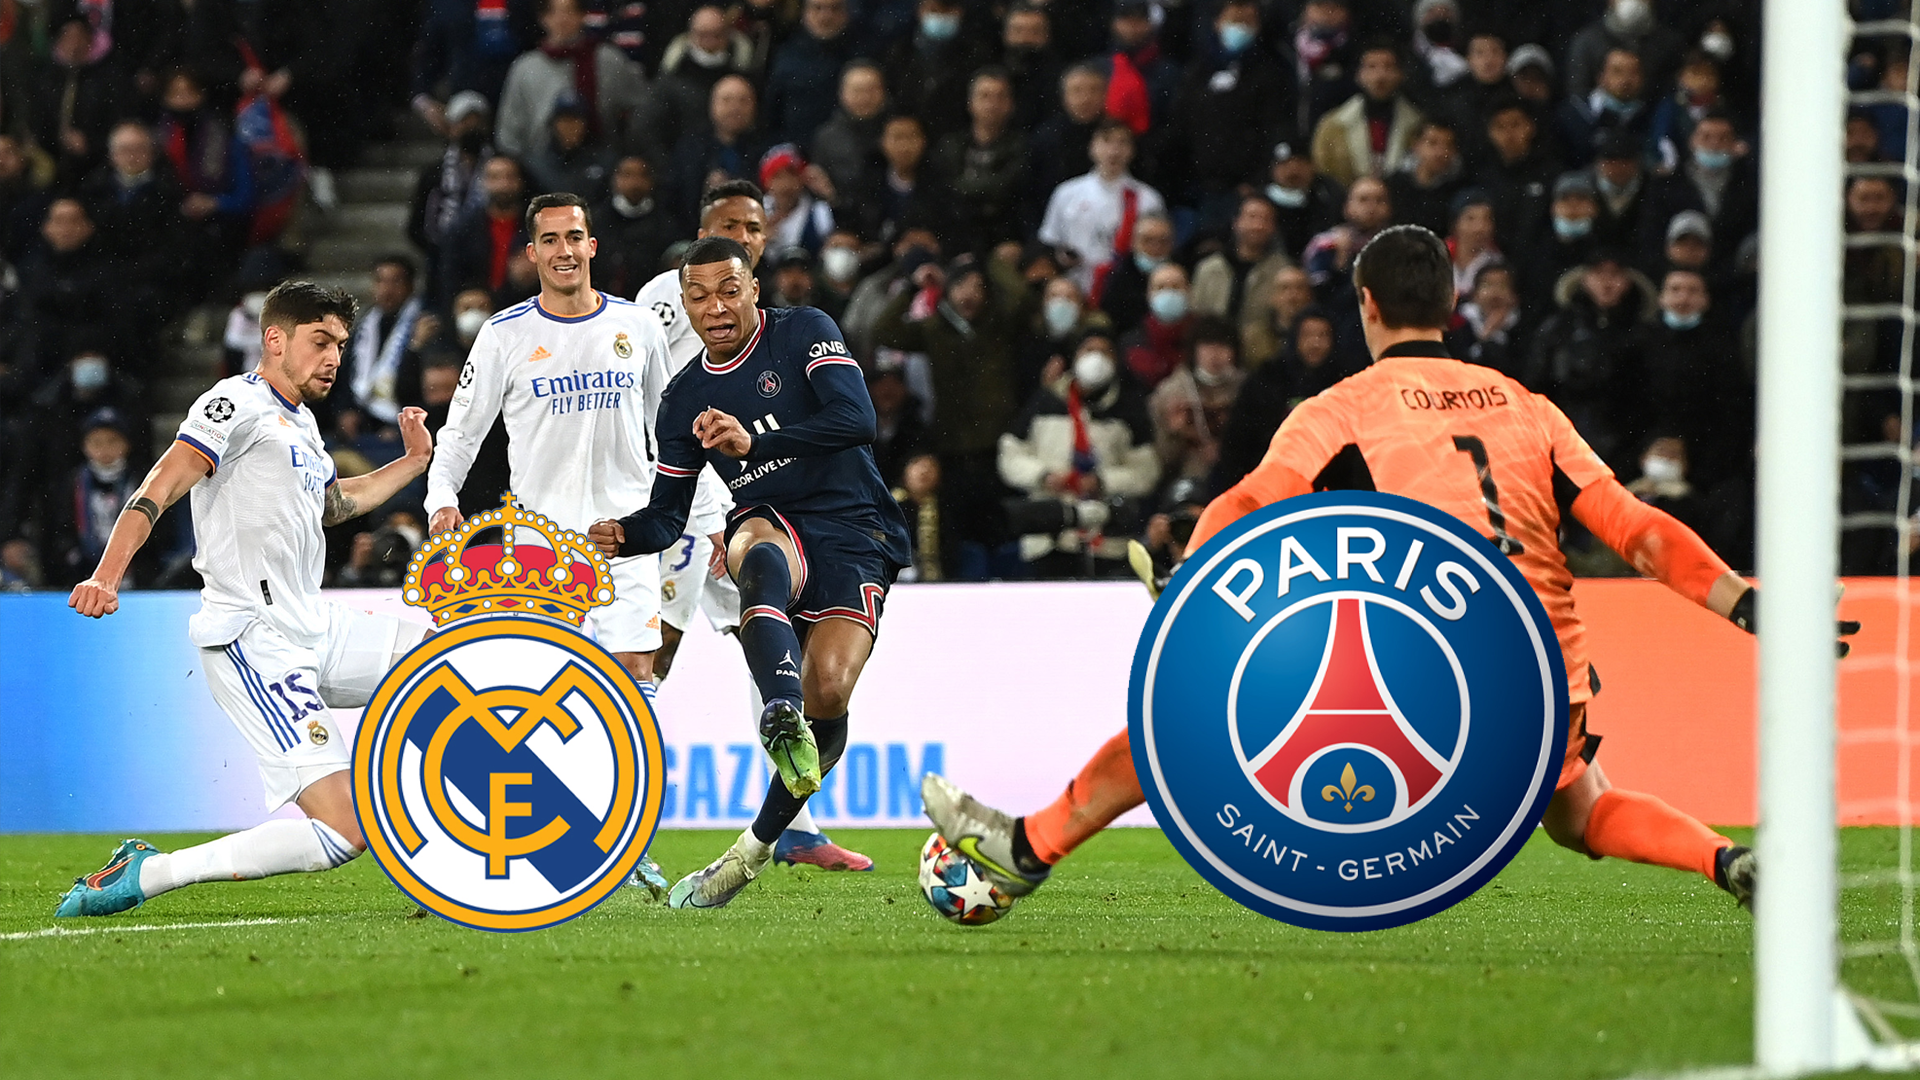 How to watch Real Madrid vs PSG in the 2021-22 Champions League from India? Goal India